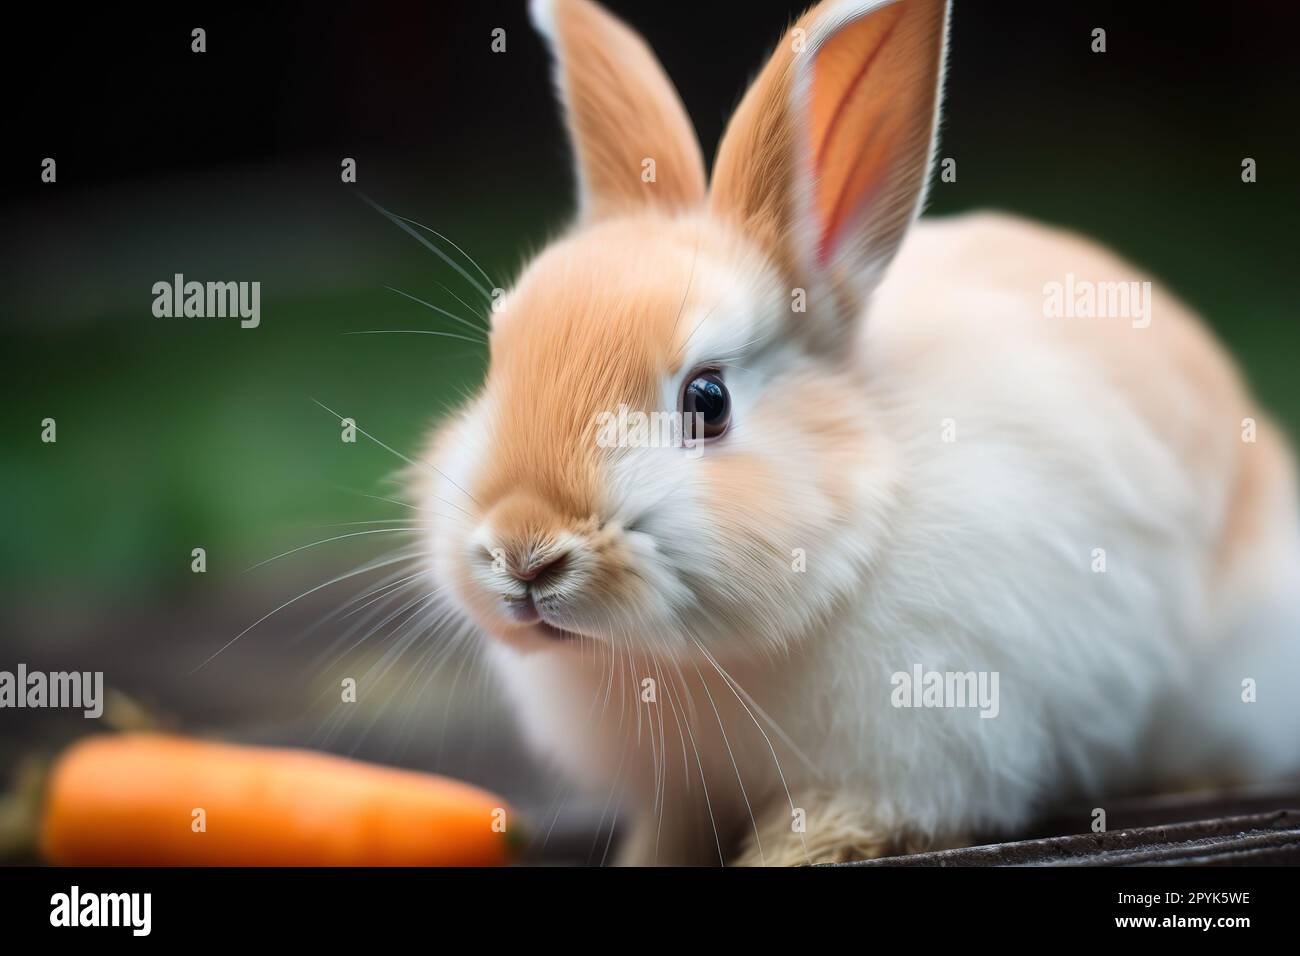 A cute and cuddly Dwarf rabbit nibbling on a carrot - This Dwarf rabbit is nibbling on a carrot, showing off its adorable and playful nature. Generati Stock Photo